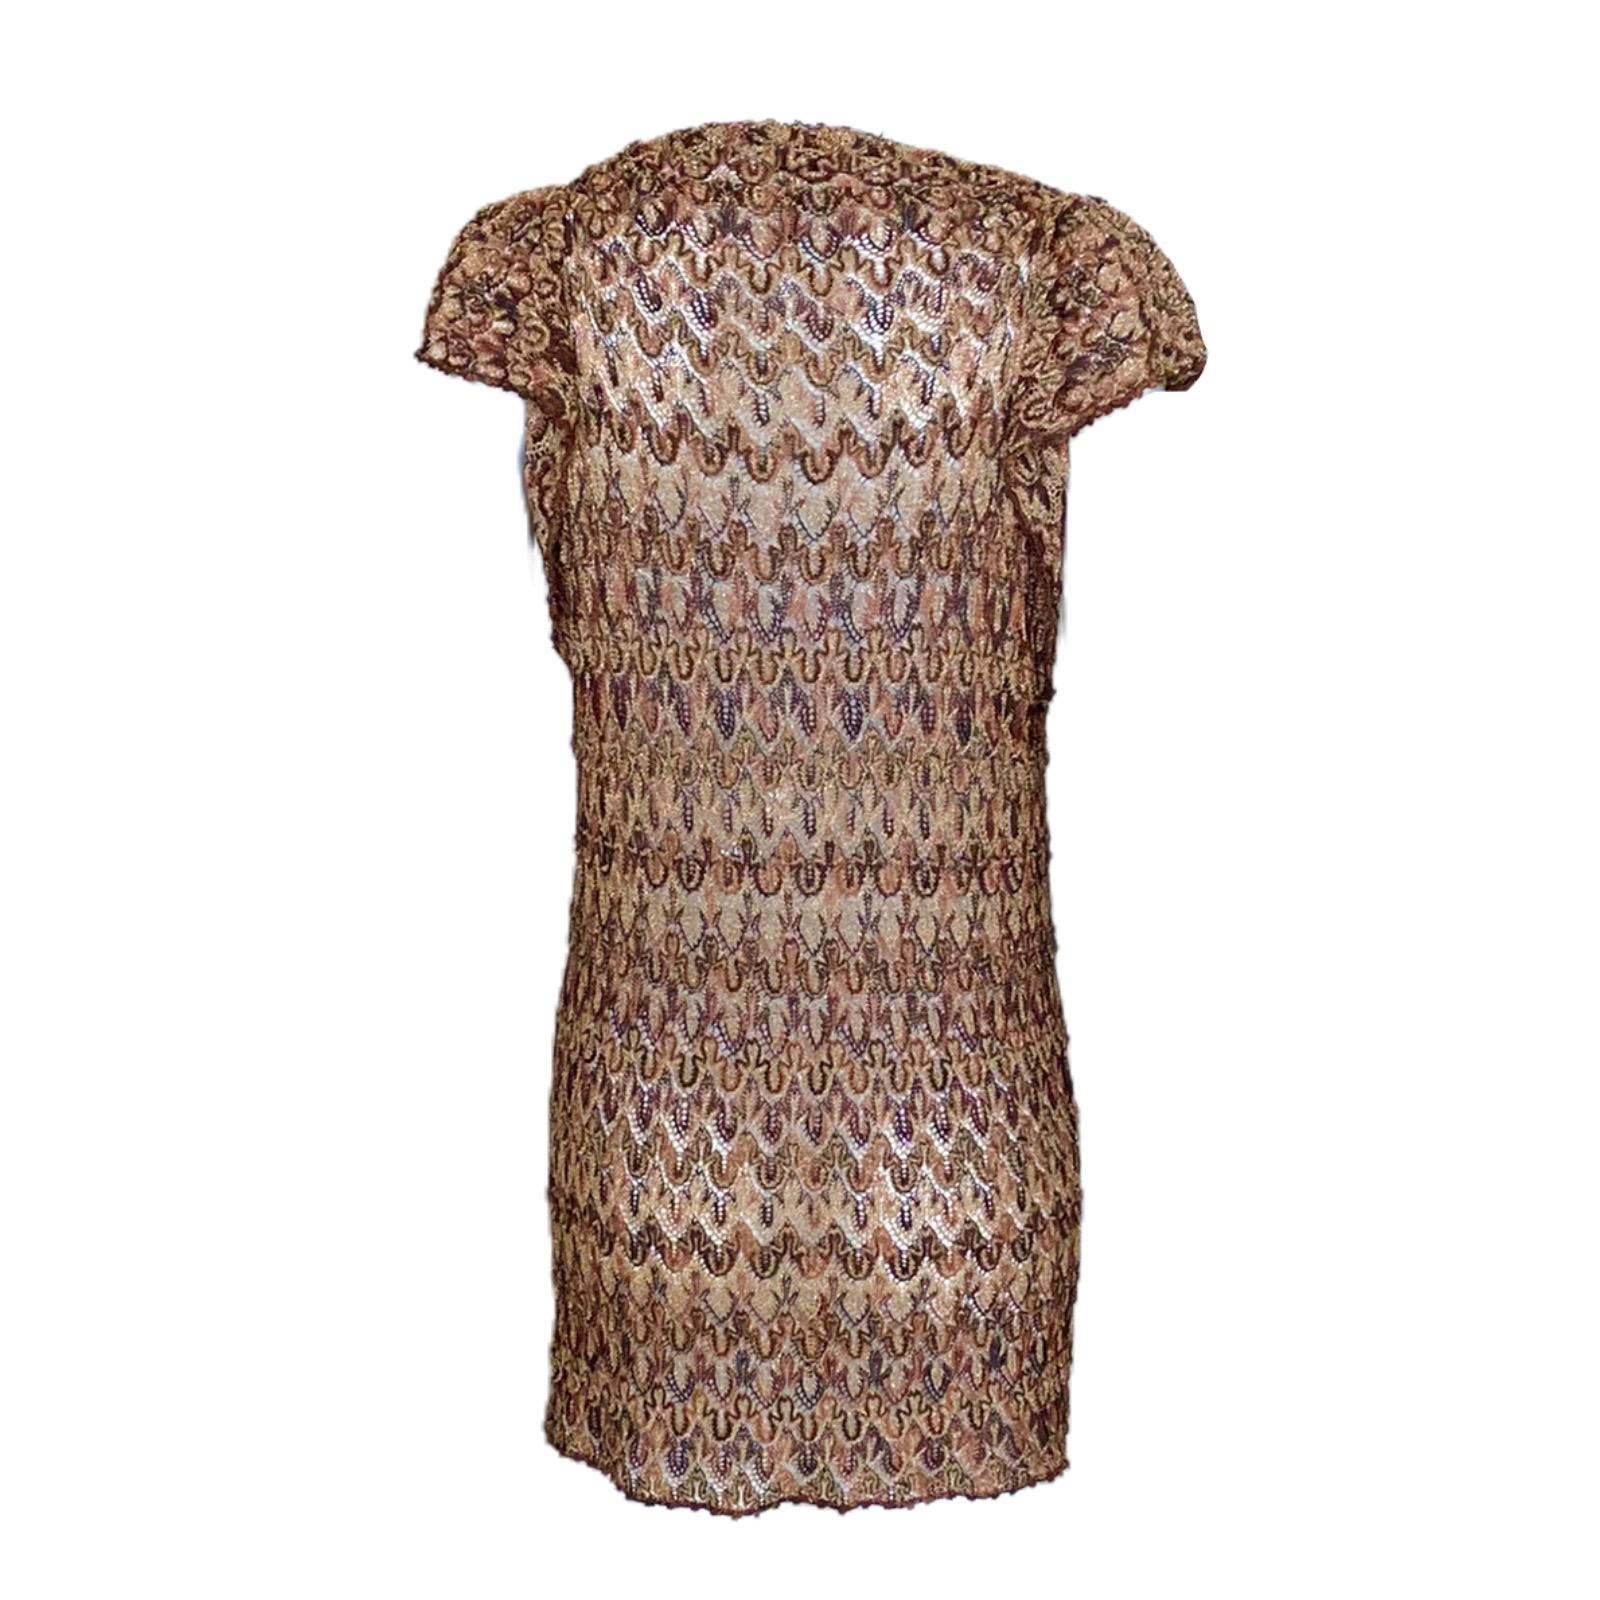 A signature Missoni knit dress in golden metallic colors is the only dress you'll need. Missoni's mini dress is an effortless way to wear the brand's signature crochet knit. 

Missoni signature crochet knit pattern
Stunning golden metallics
Draped